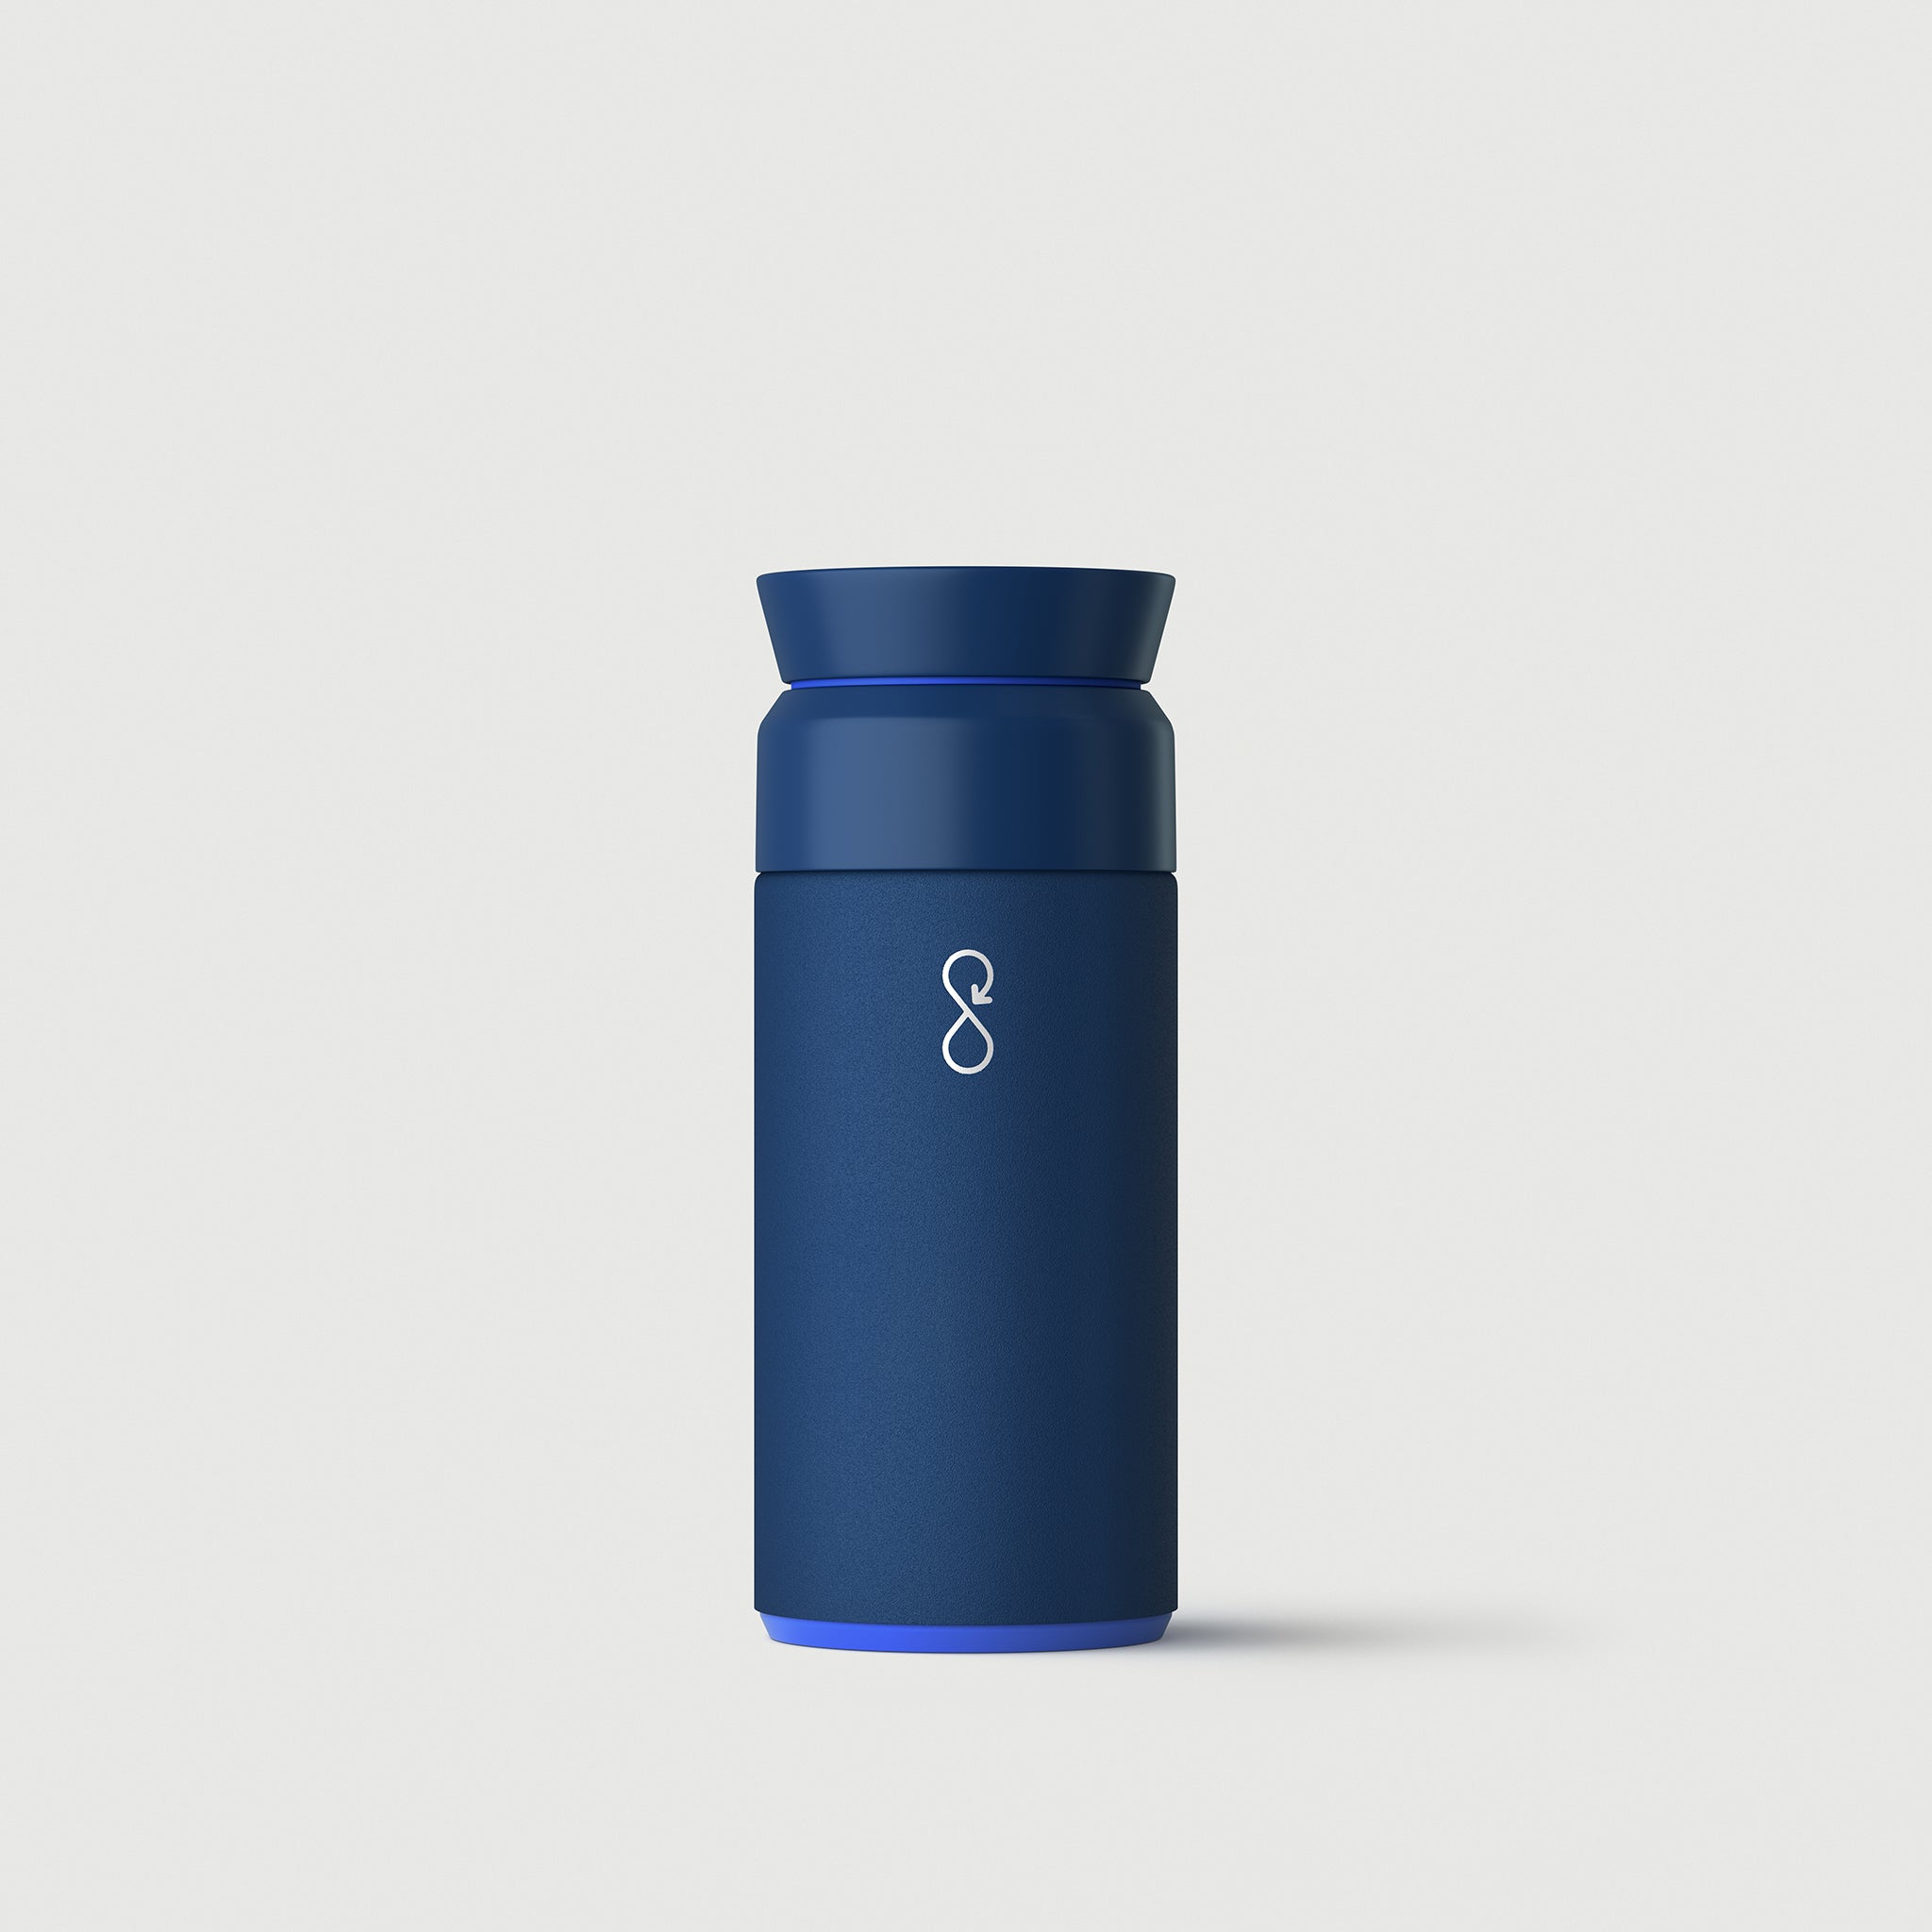 Product picture of Brew Flask - Ocean Blue (350ml)